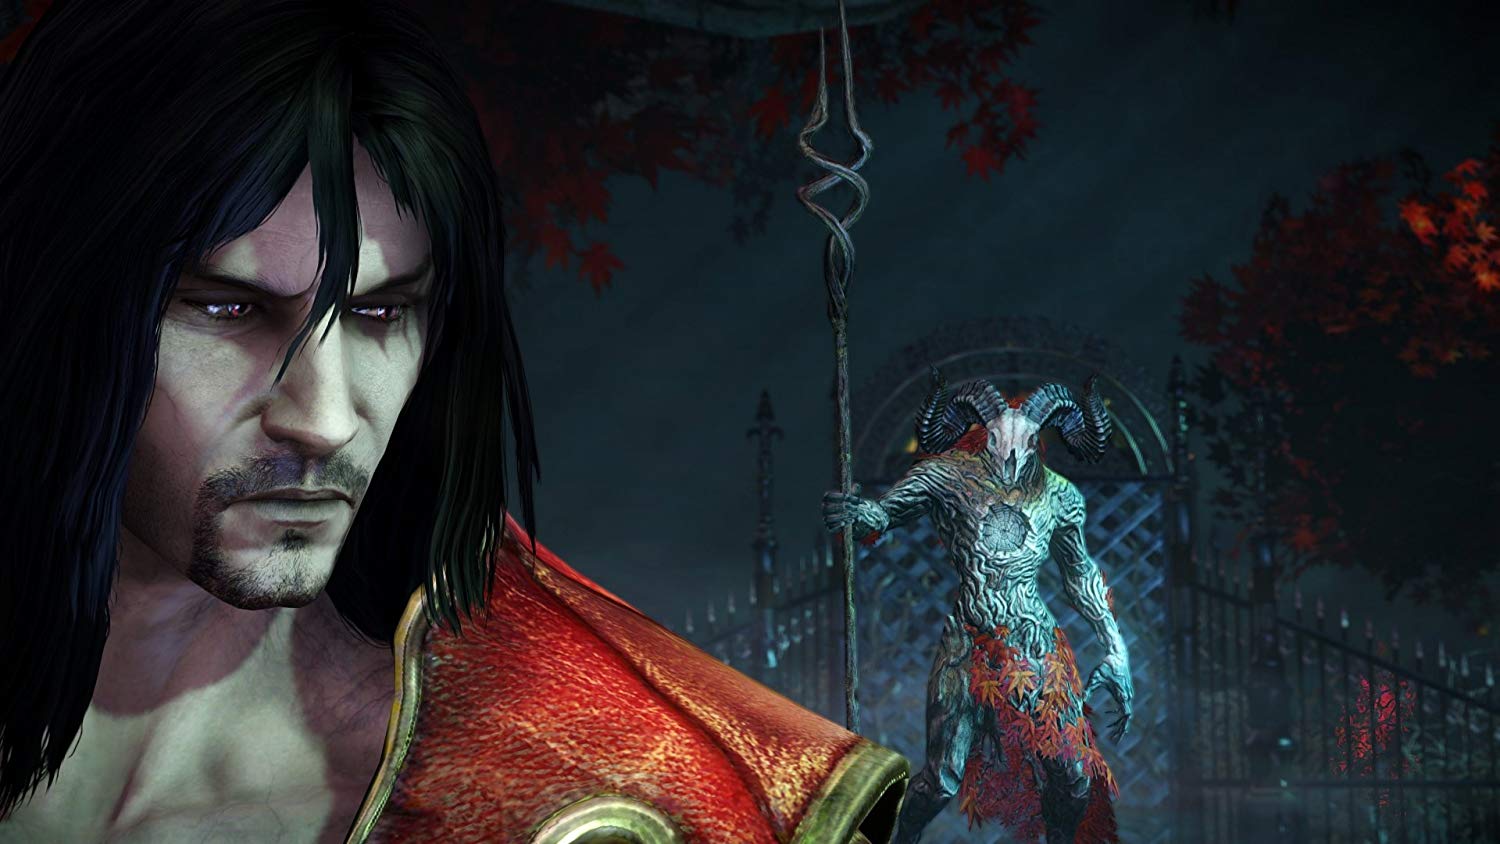 Test Castlevania Lords of Shadow 2 sur PS4 et Xbox One sur PS4